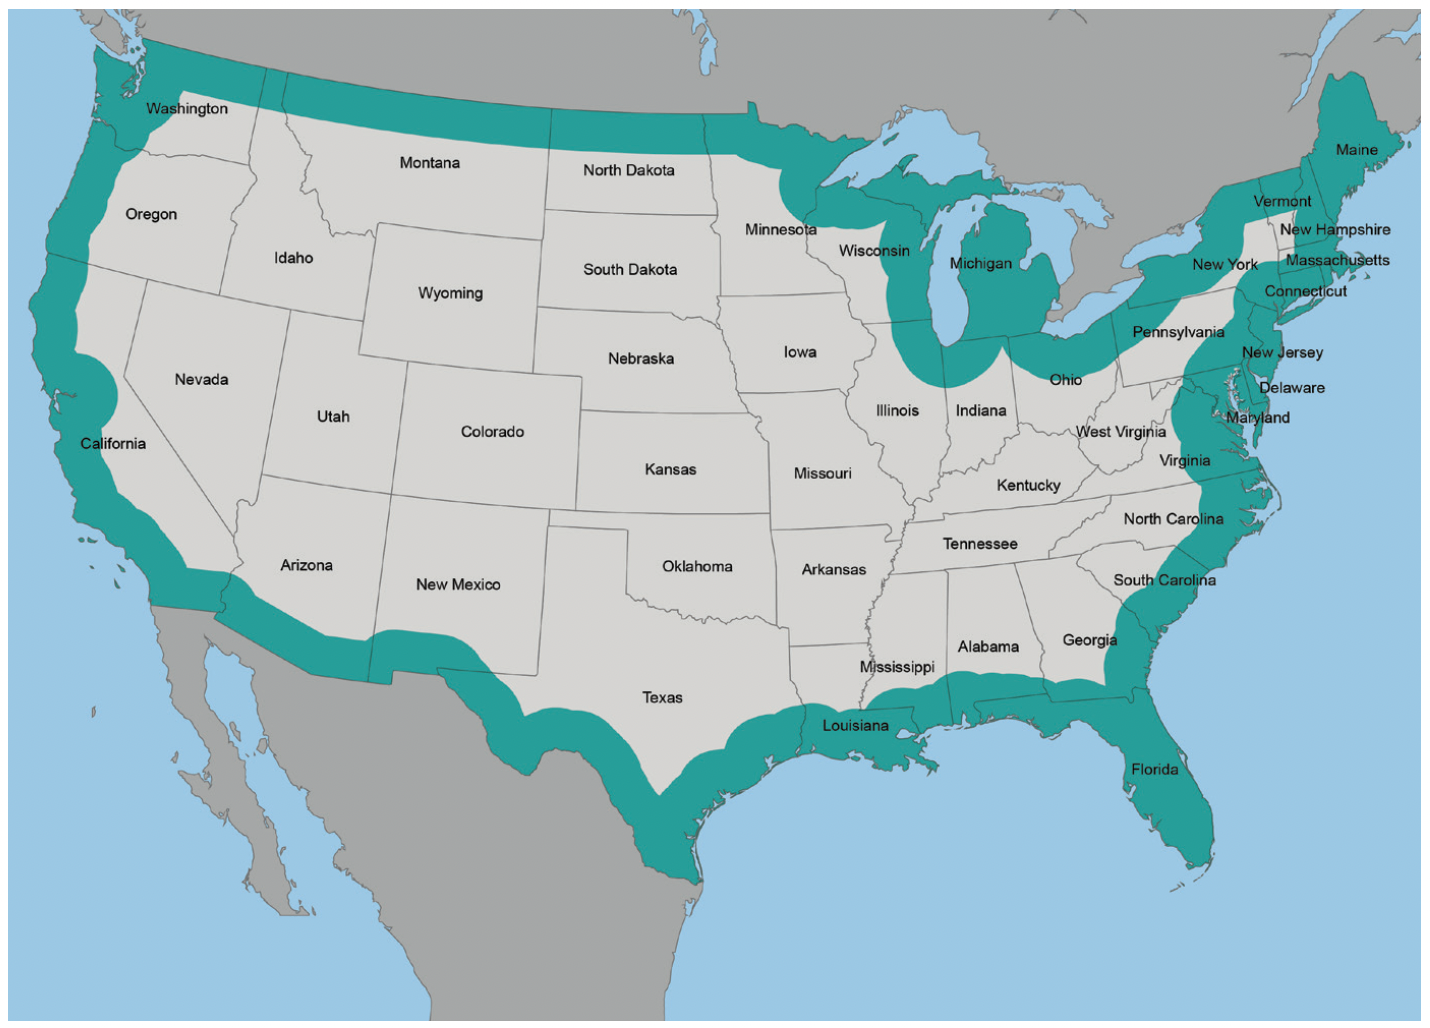 This map shows the territorial definition of the border for U.S. federal law enforcement purposes.